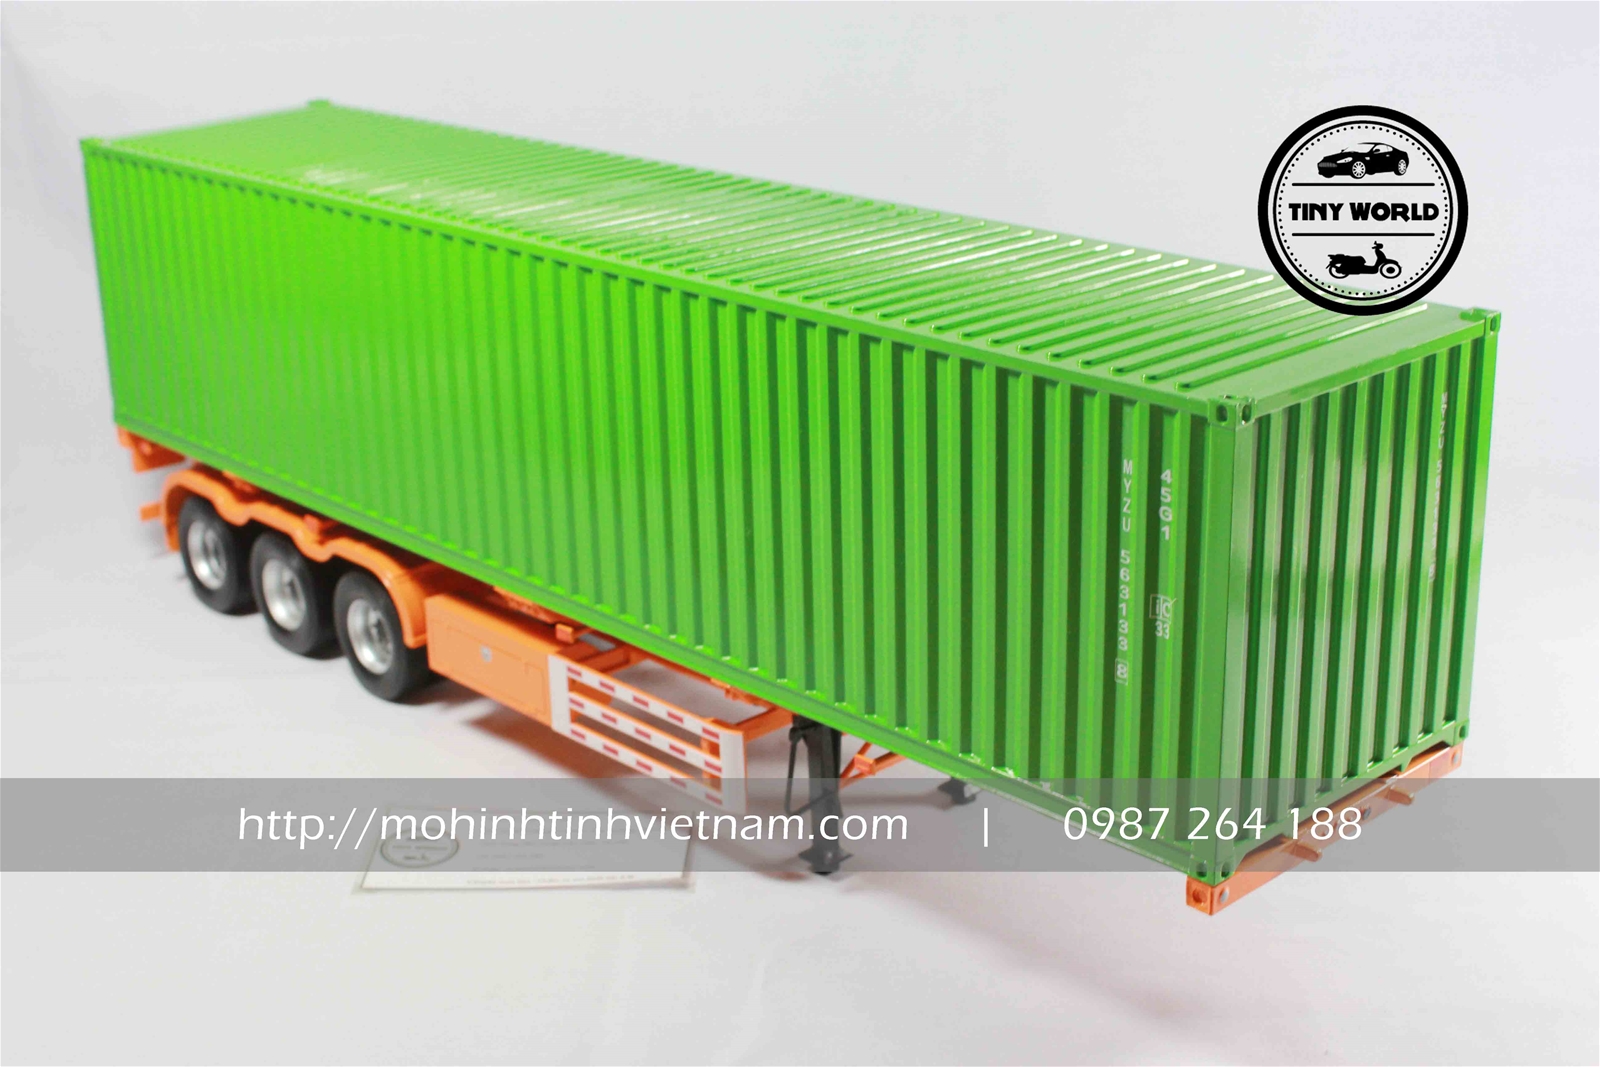 THÙNG CONTAINER + TRAILER (XANH) 1:24 DEALER